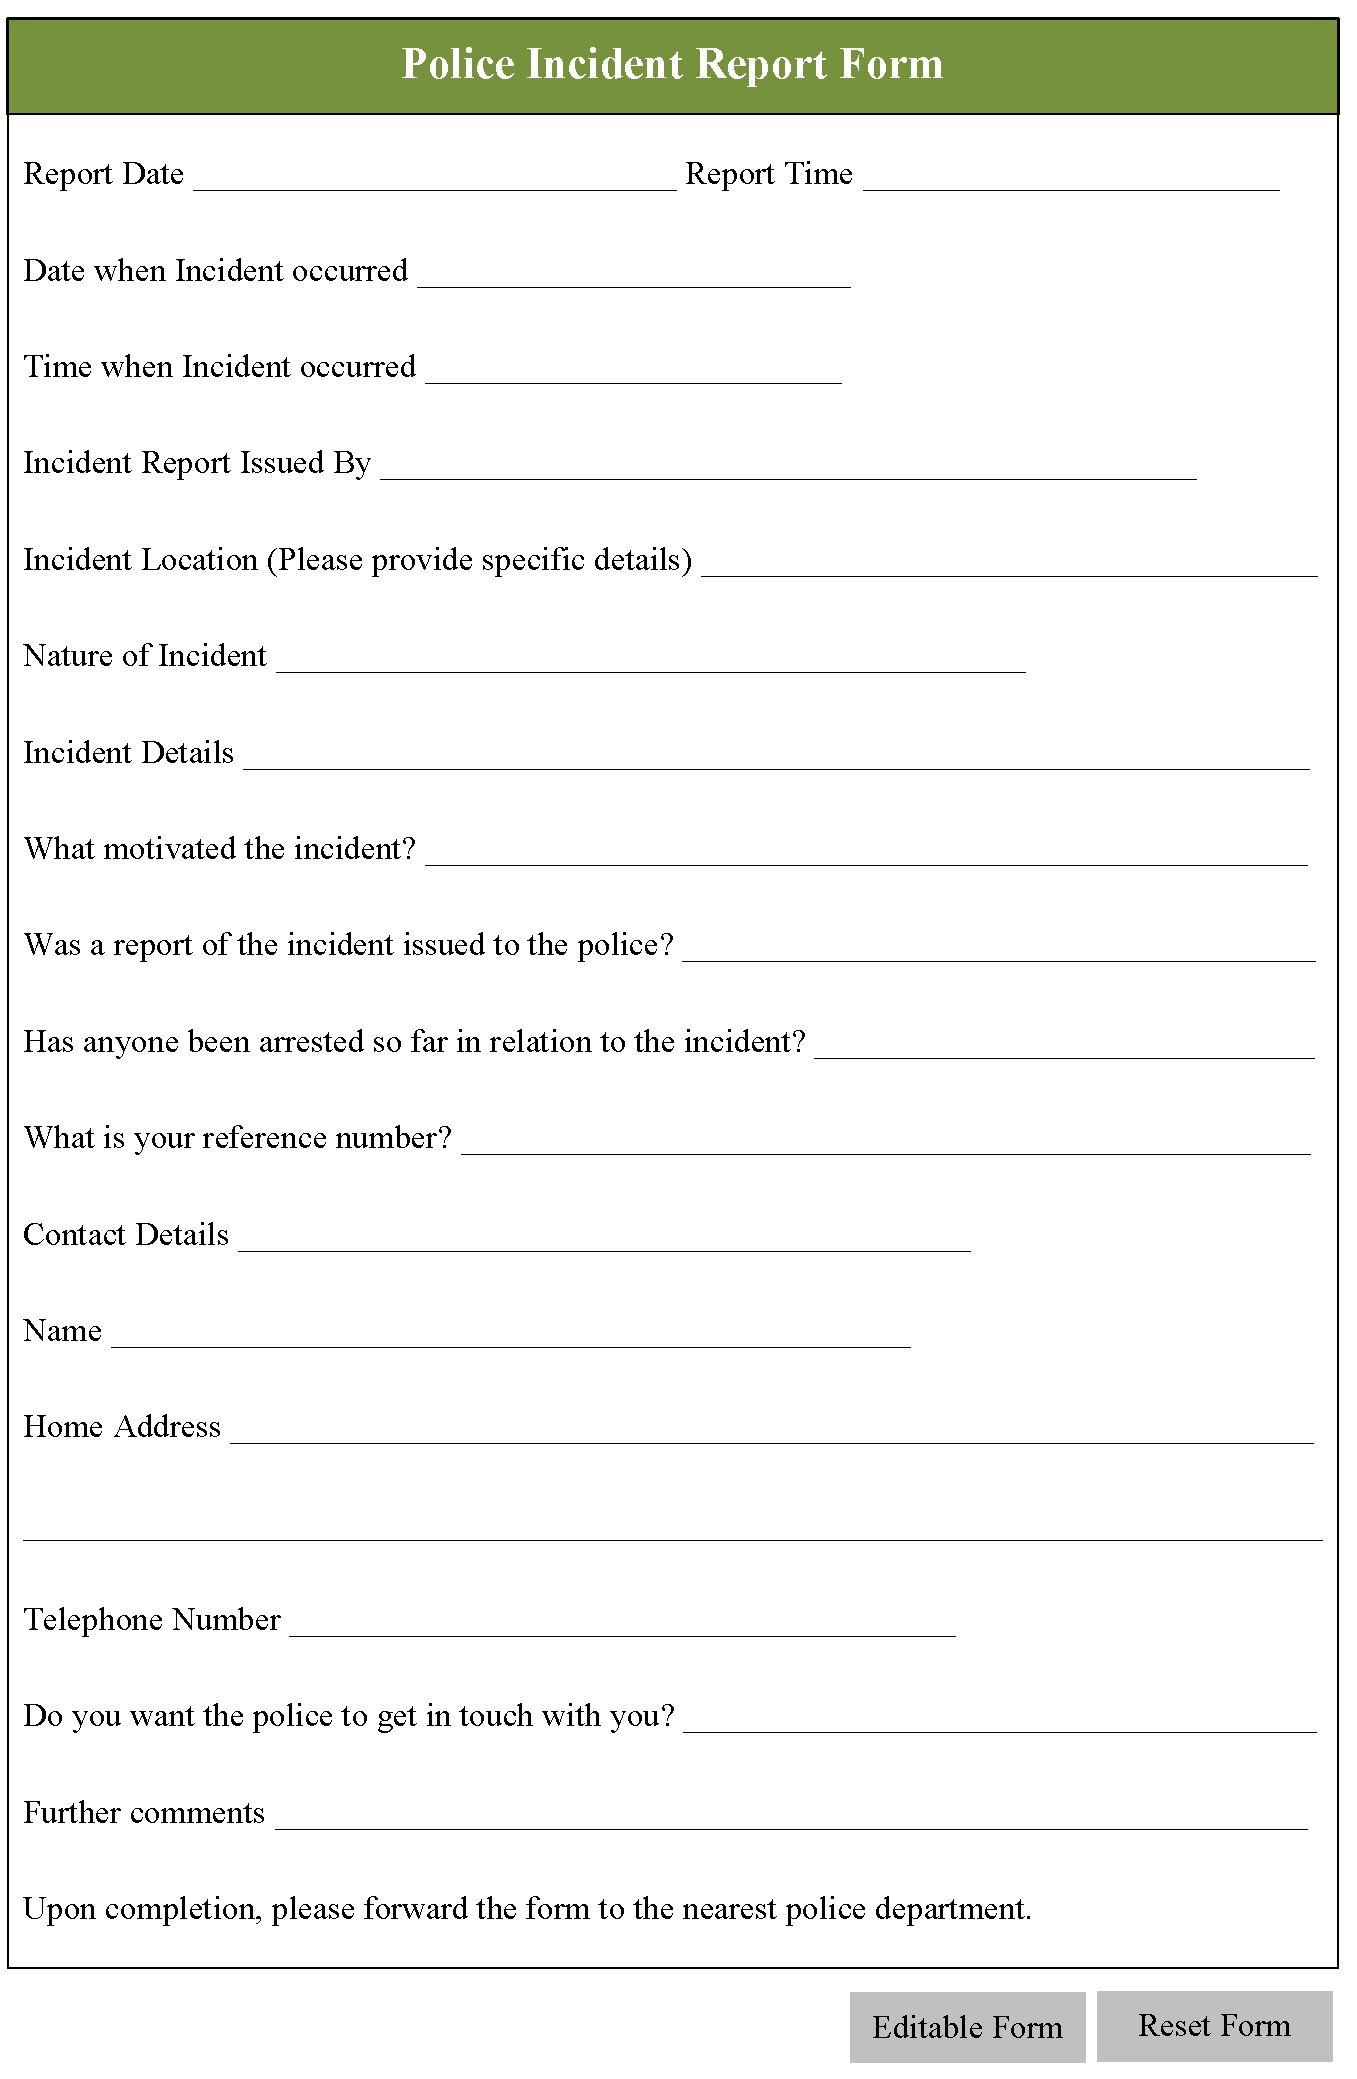 Police Incident Report Form | Editable Forms Intended For Police Incident Report Template